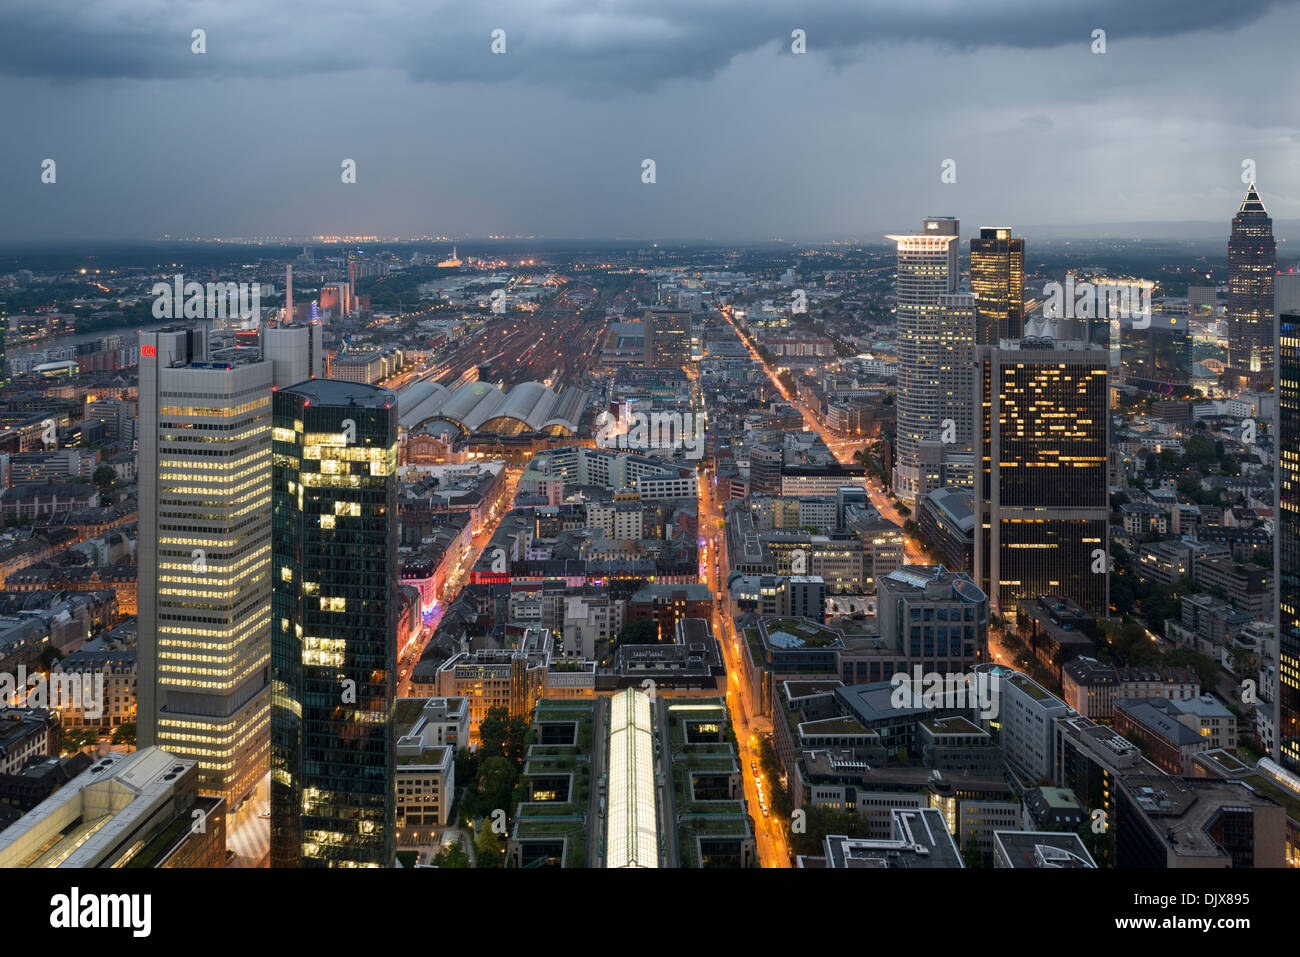 A view of Frankfurt am Main's financial district from the top of a skyscraper. Frankfurt am Main, Germany. Stock Photo